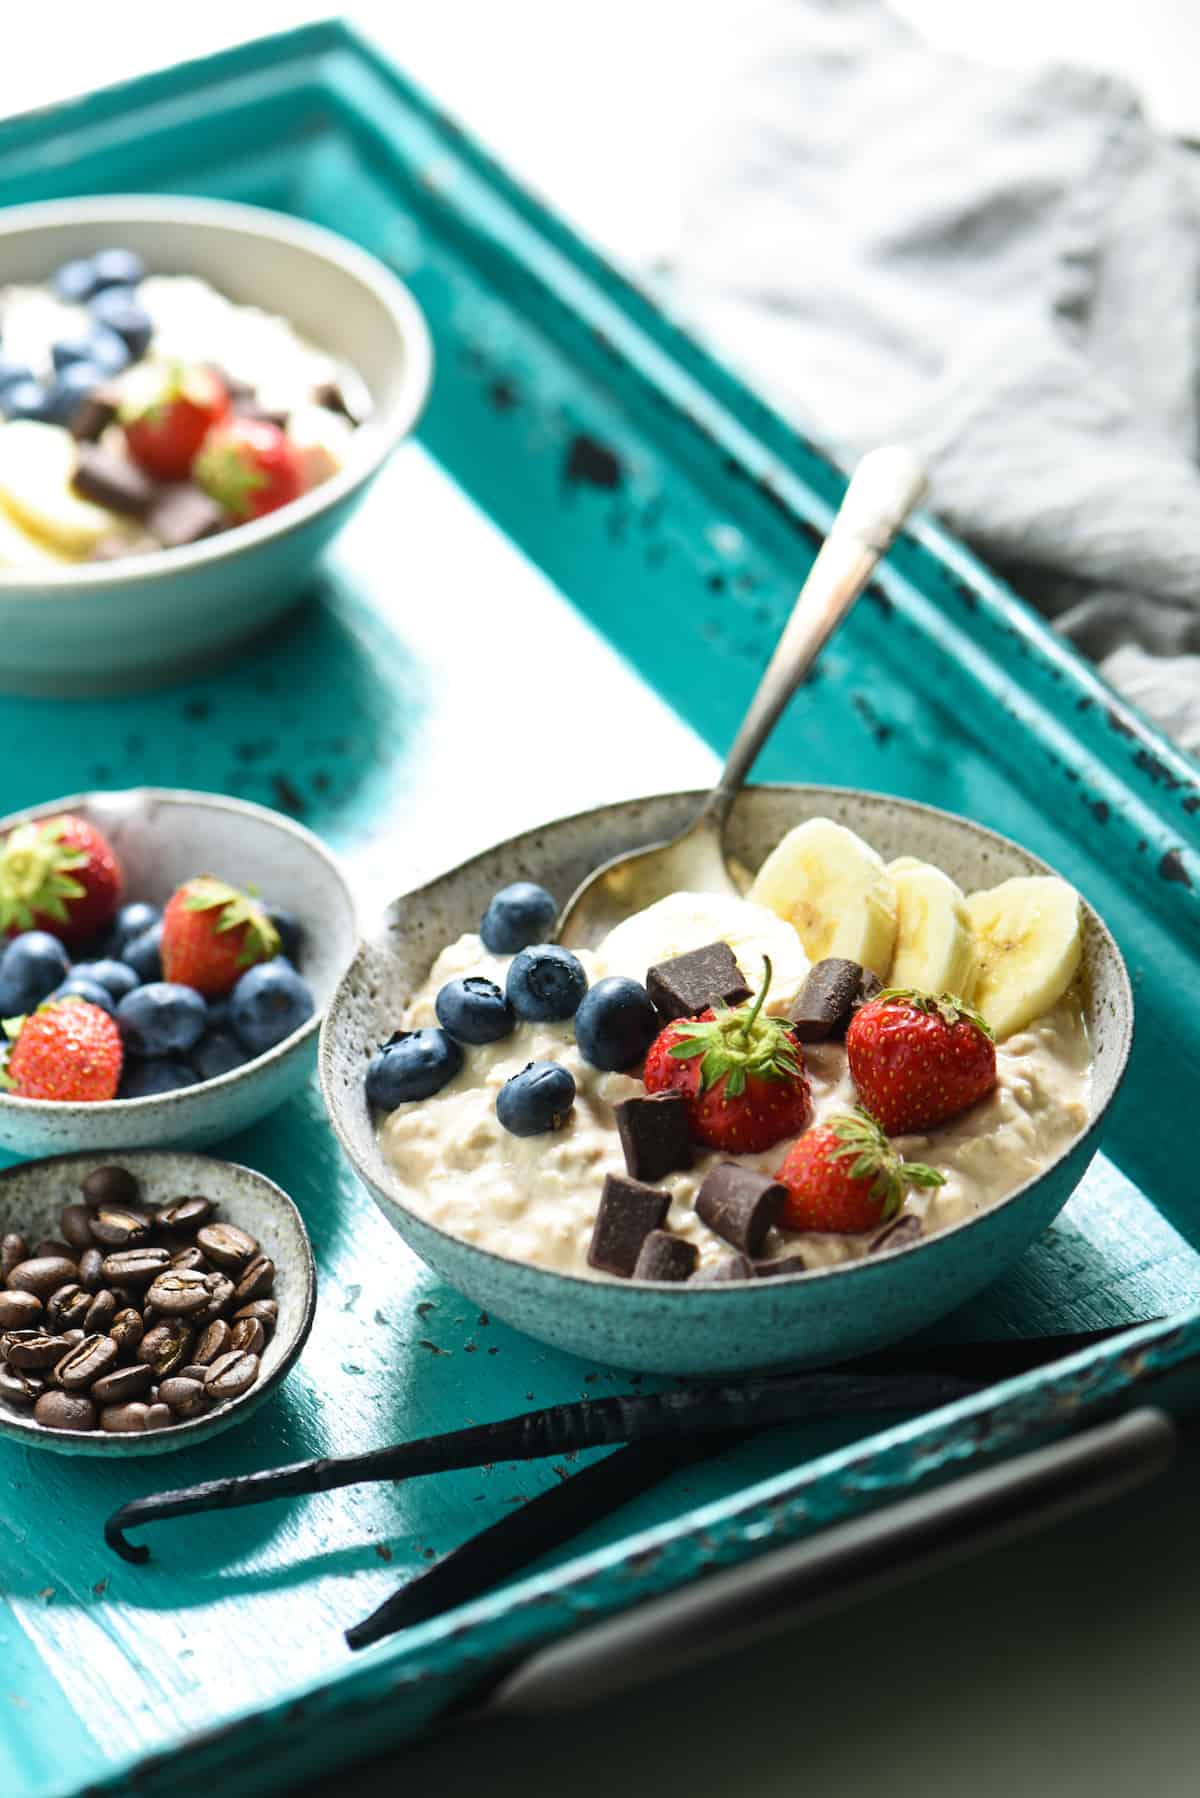 A bowl of overnight oats with yogurt, topped with bananas, blueberries and sliced banana, on a rustic teal tray.